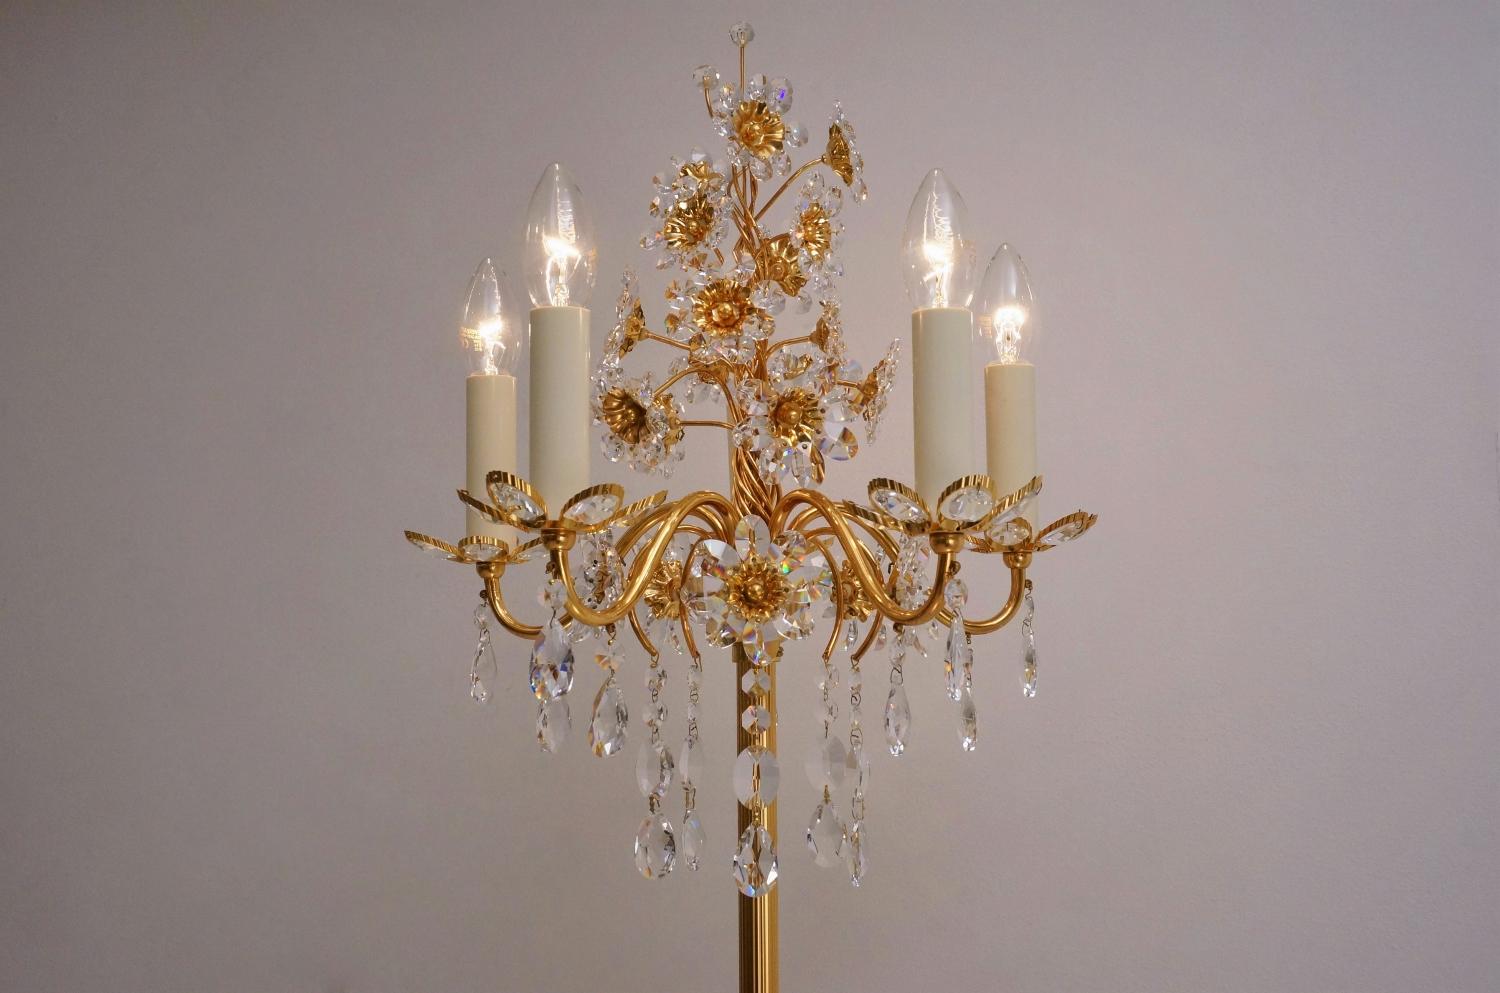 Palwa floor lamp, gilt brass frame with crystal flowers and beads, 1970s circa, German.

This light has been thoroughly cleaned respecting the vintage patina. It is newly rewired and earthed with gold silk cable and a new black plug. It has been